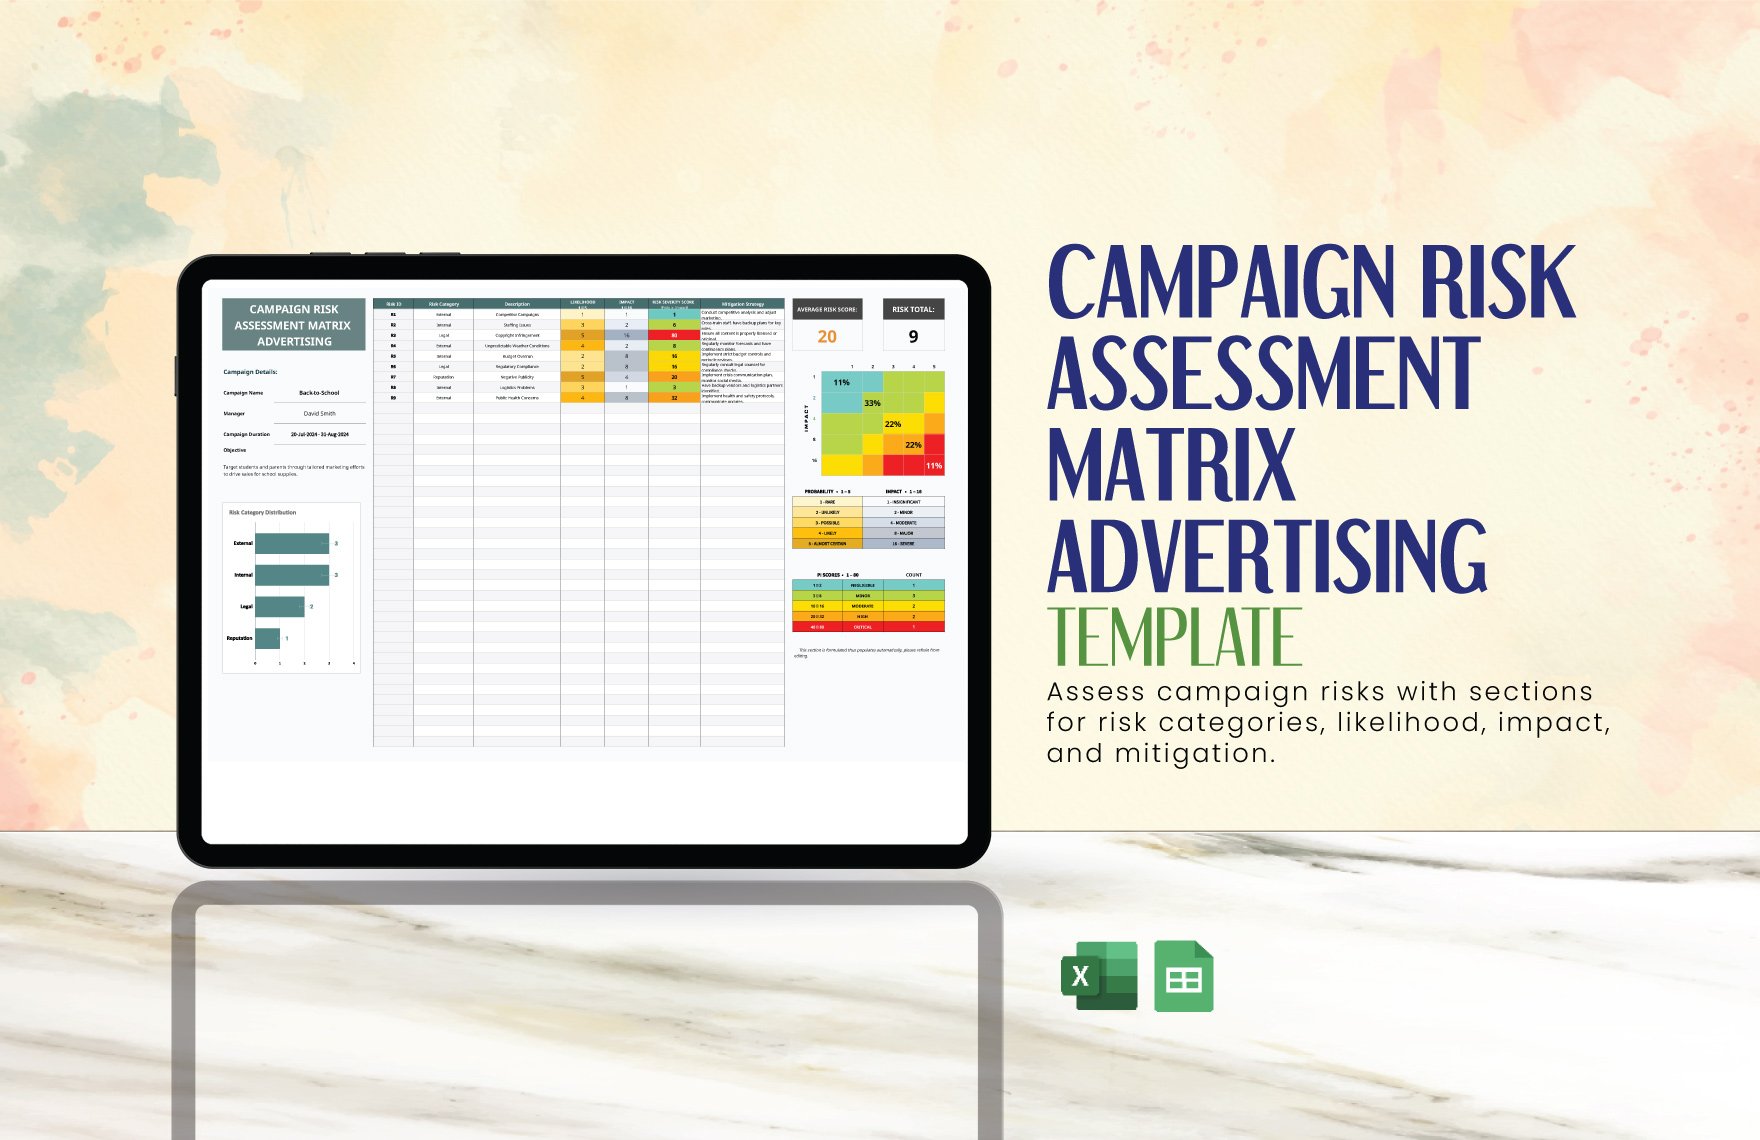 Campaign Risk Assessment Matrix Advertising Template in Excel, Google Sheets